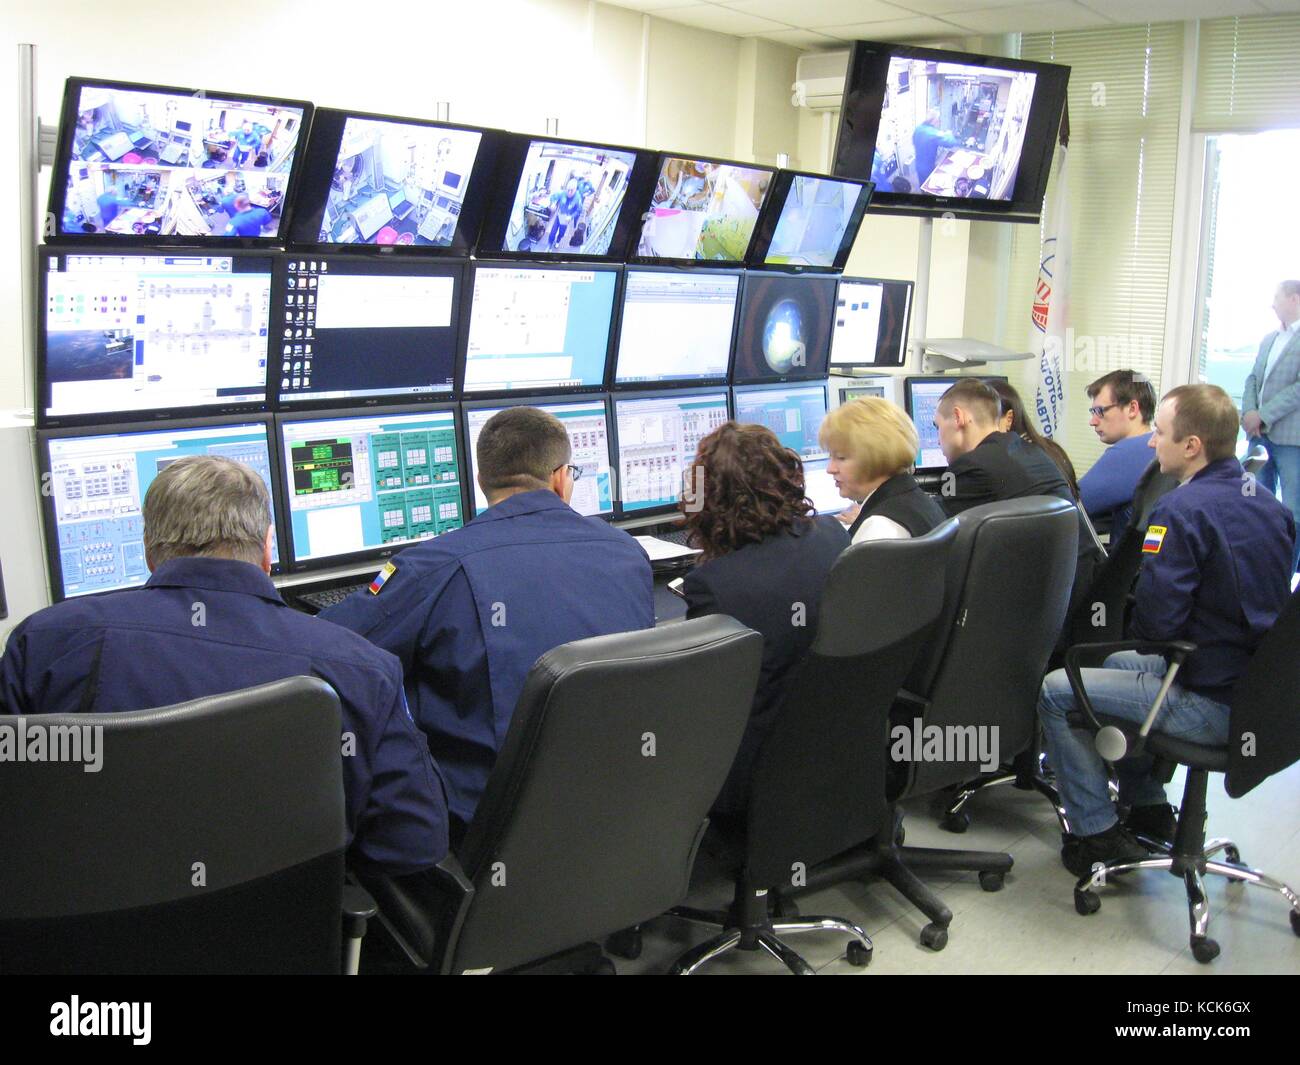 Control room technicians watch NASA International Space Station Soyuz MS-04 Expedition 51 prime crew members Russian cosmonaut Fyodor Yurchikhin of Roscosmos and American astronaut Jack Fischer conduct their final qualification exams at the Gagarin Cosmonaut Training Center March 30, 2017 in Star City, Russia.  (photo by Rob Navias  via Planetpix) Stock Photo